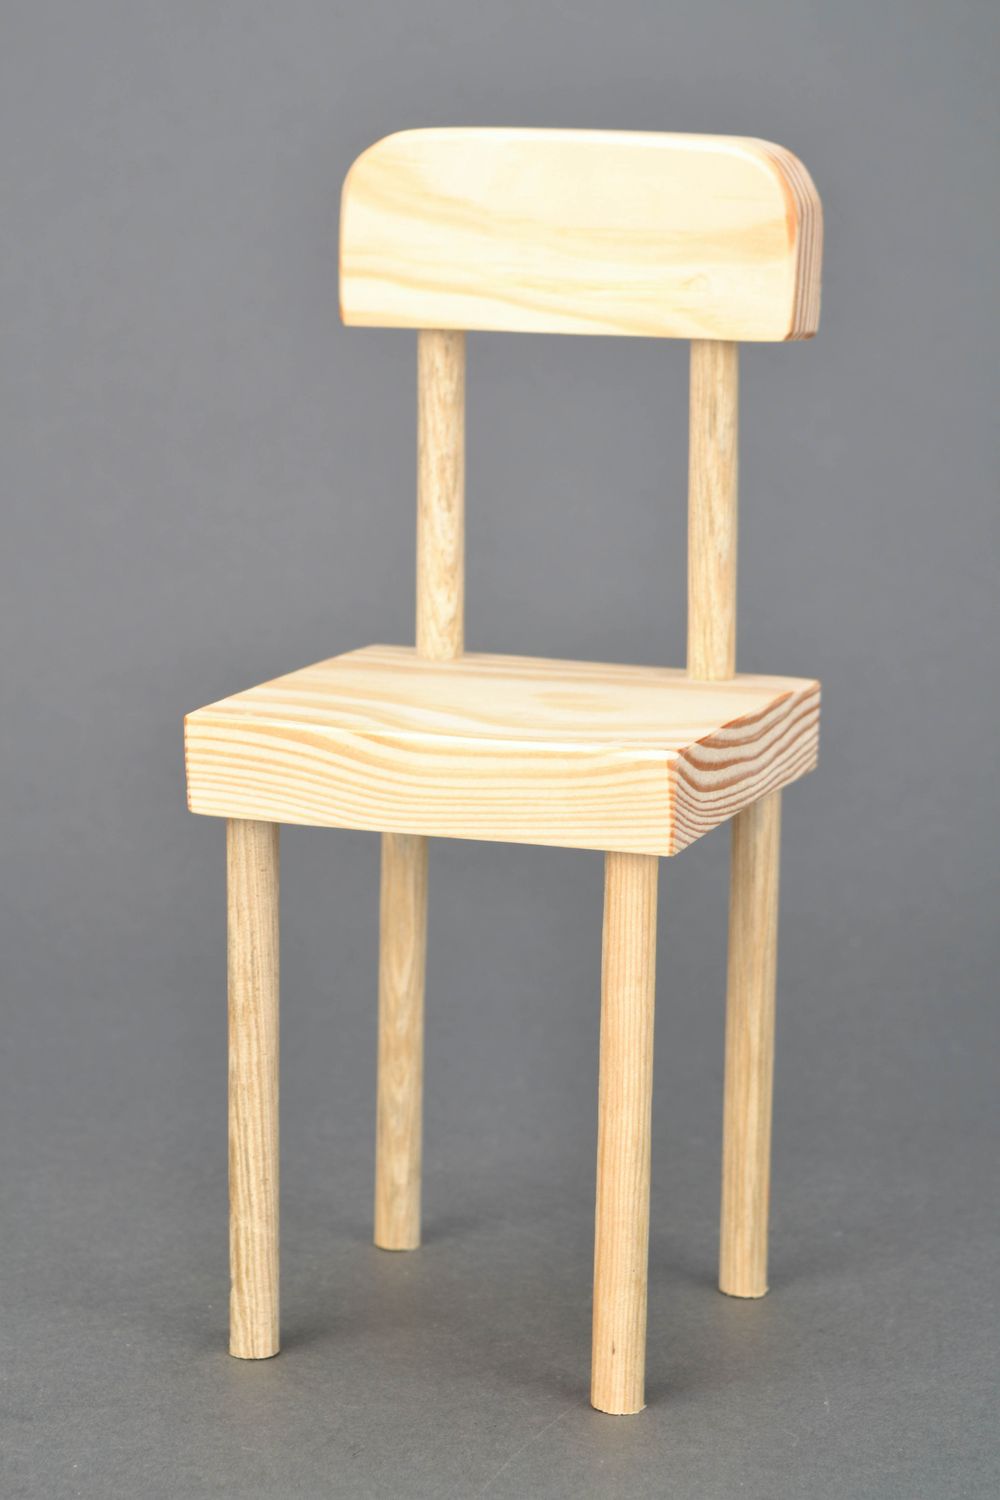 Decorative doll chair made of wood photo 3